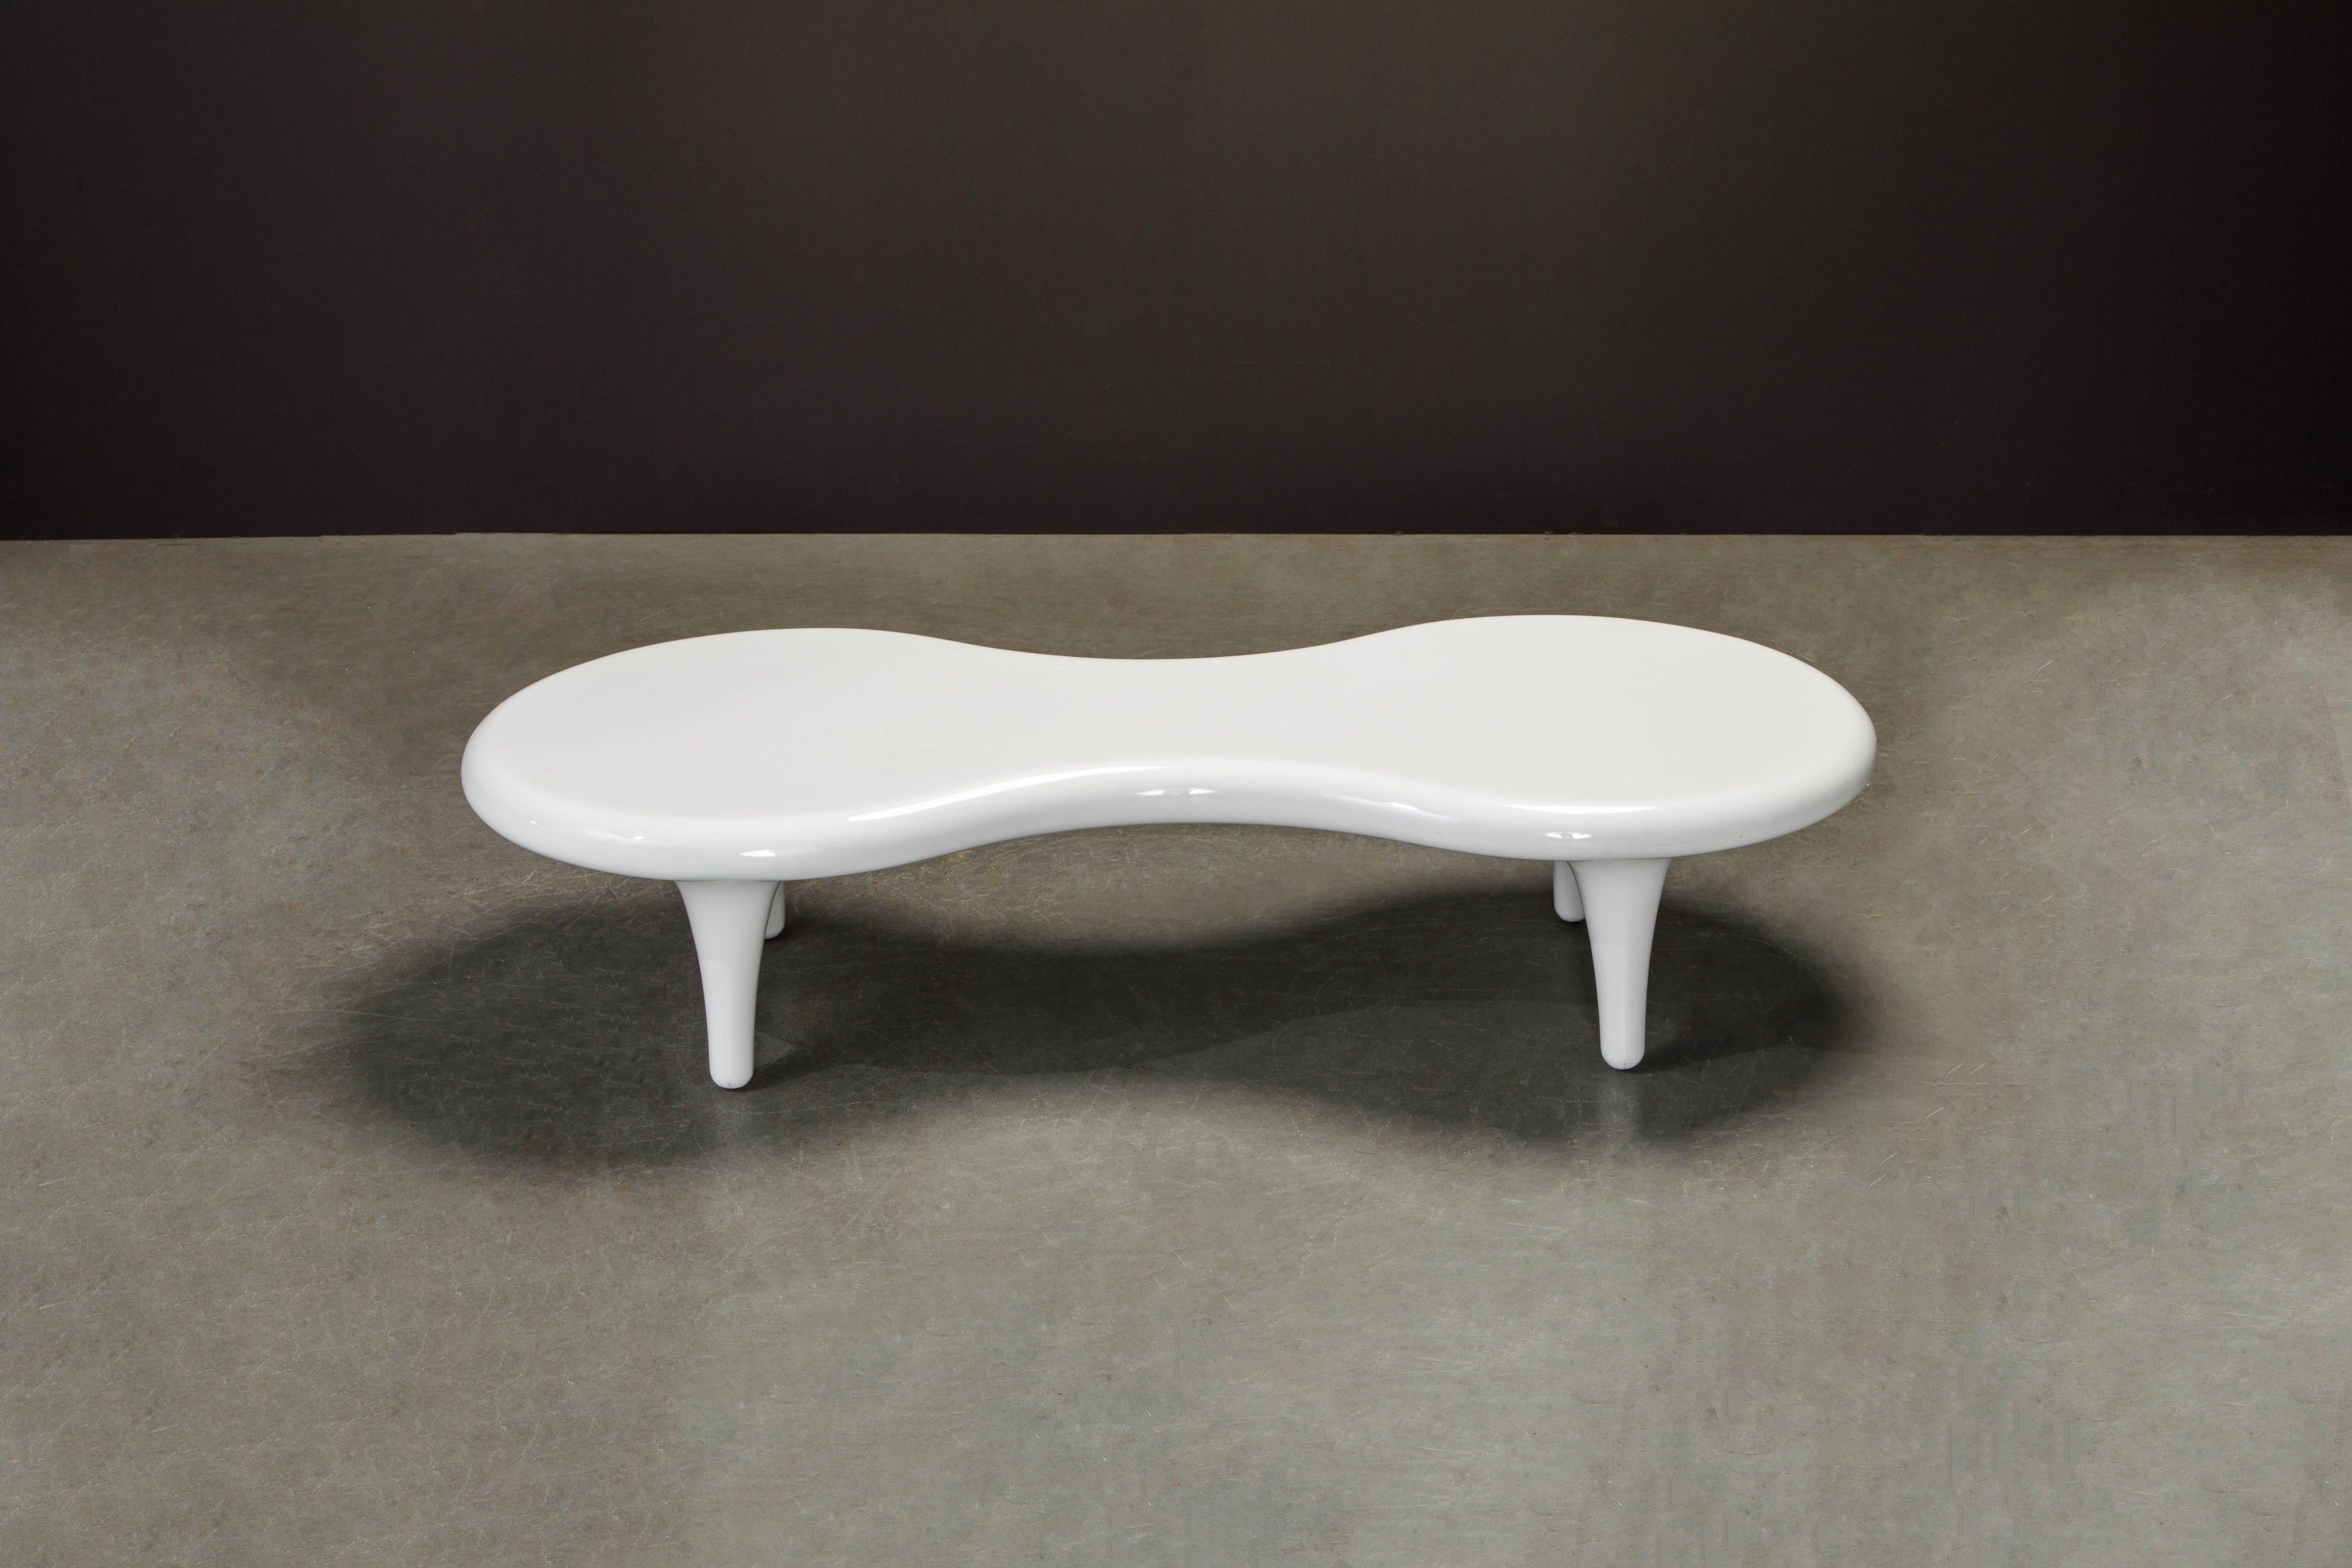 This beautiful Organic Modern 'Orgone' cocktail table by designer Marc Newson was created for Cappellini, Italy. Elevated above four legs, the 'Orgone' table is made of fiberglass with a poplar fiberglass insert. The silhouette is evocative of a